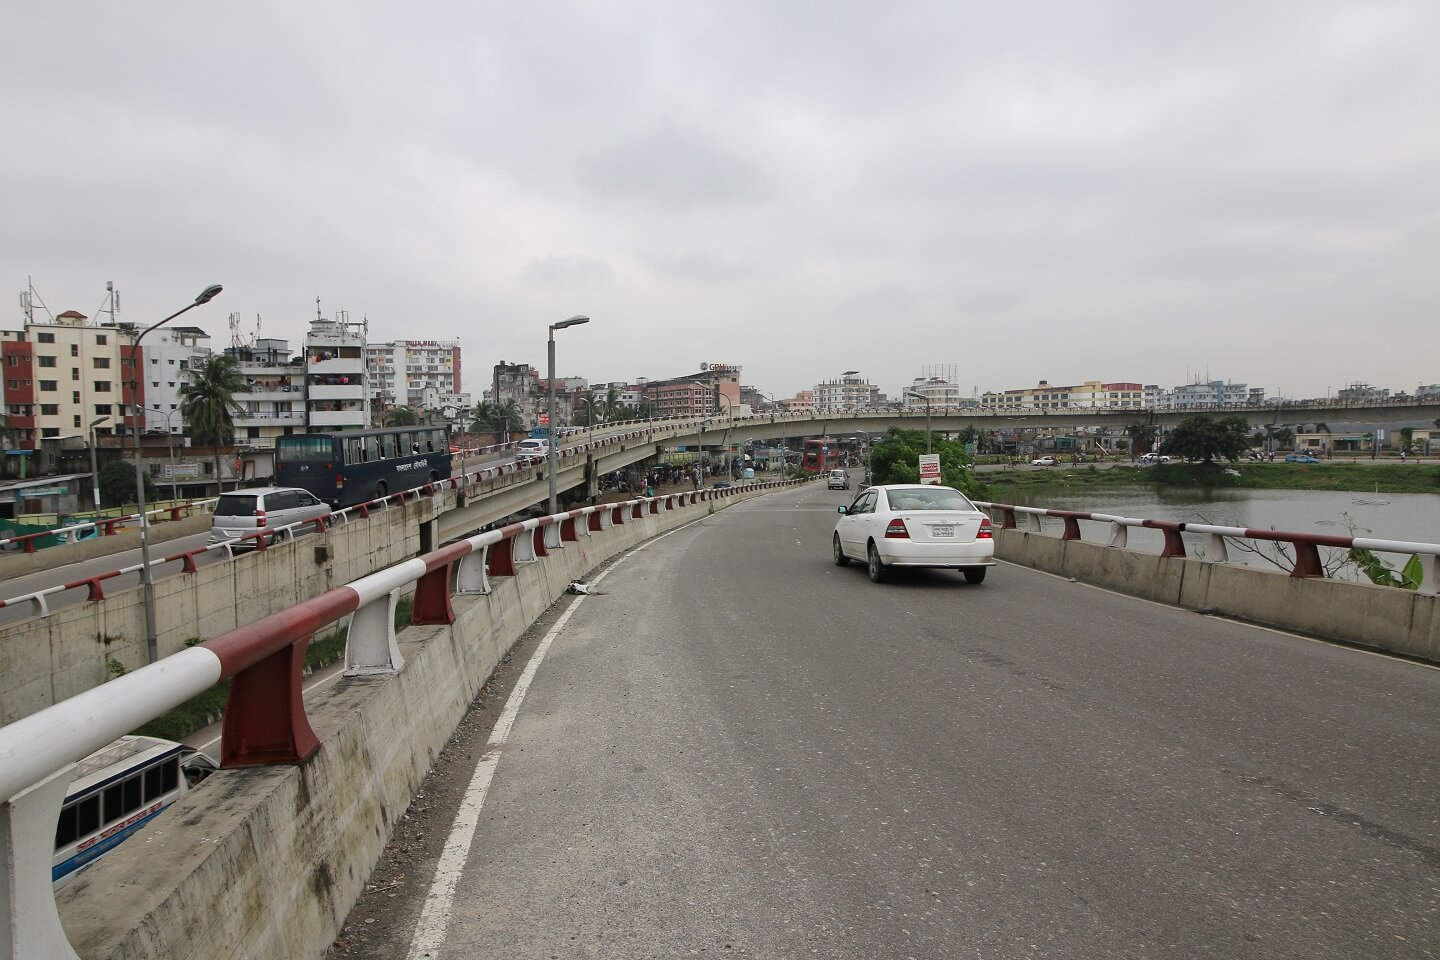 Infrastructure like flyovers can boost property development and local businesses in a particular area